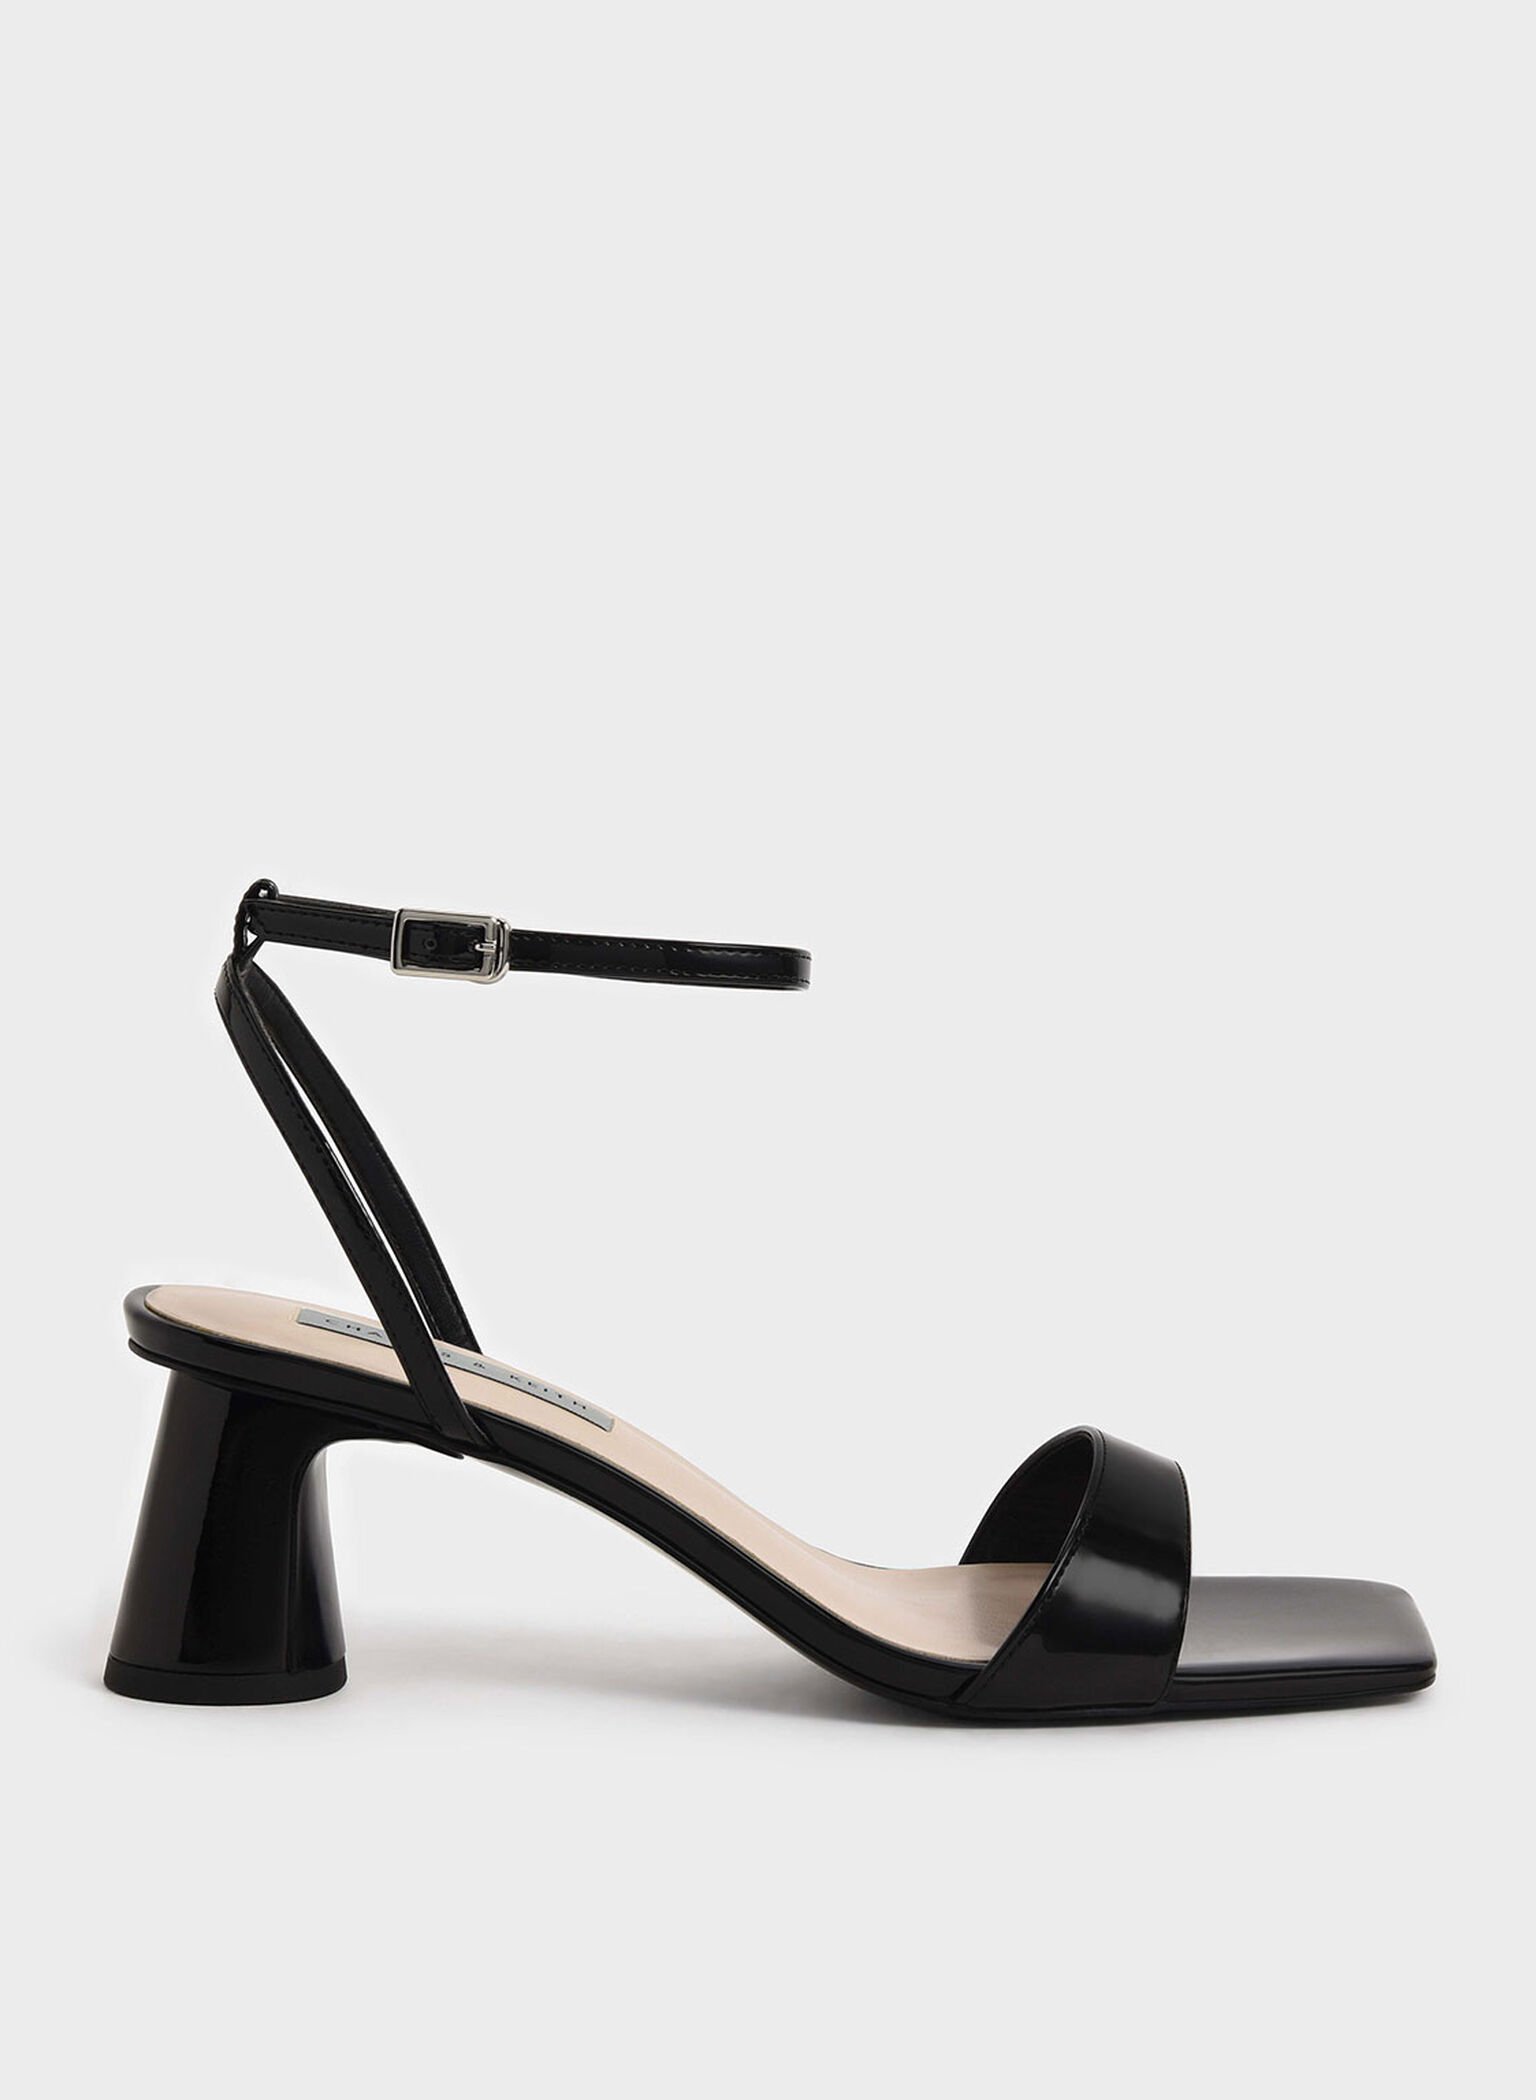 Black Patent Ankle-Strap Cylindrical Heel Sandals - CHARLES & KEITH US